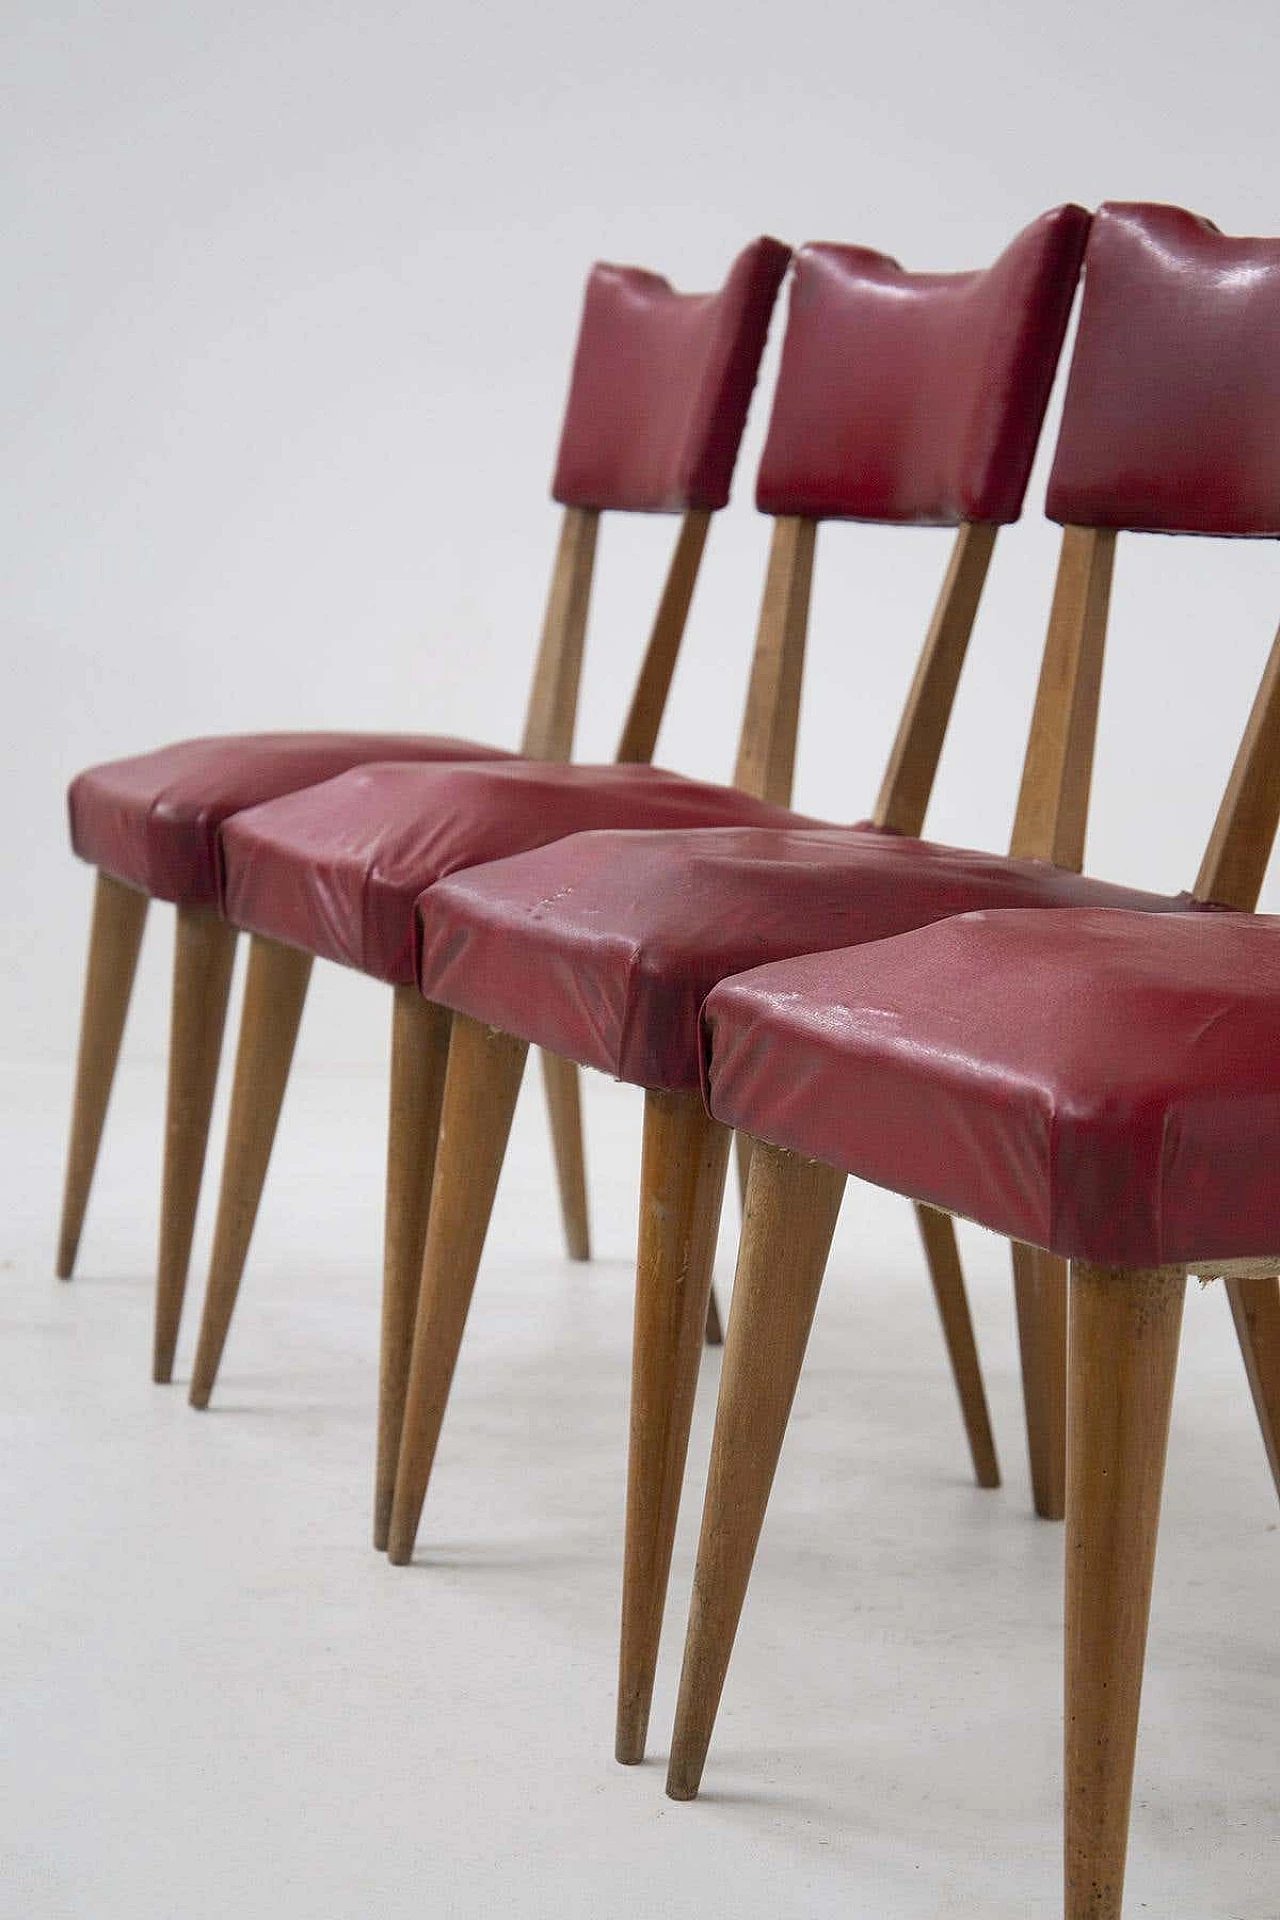 4 Wooden chairs upholstered in red skai, 1950s 3